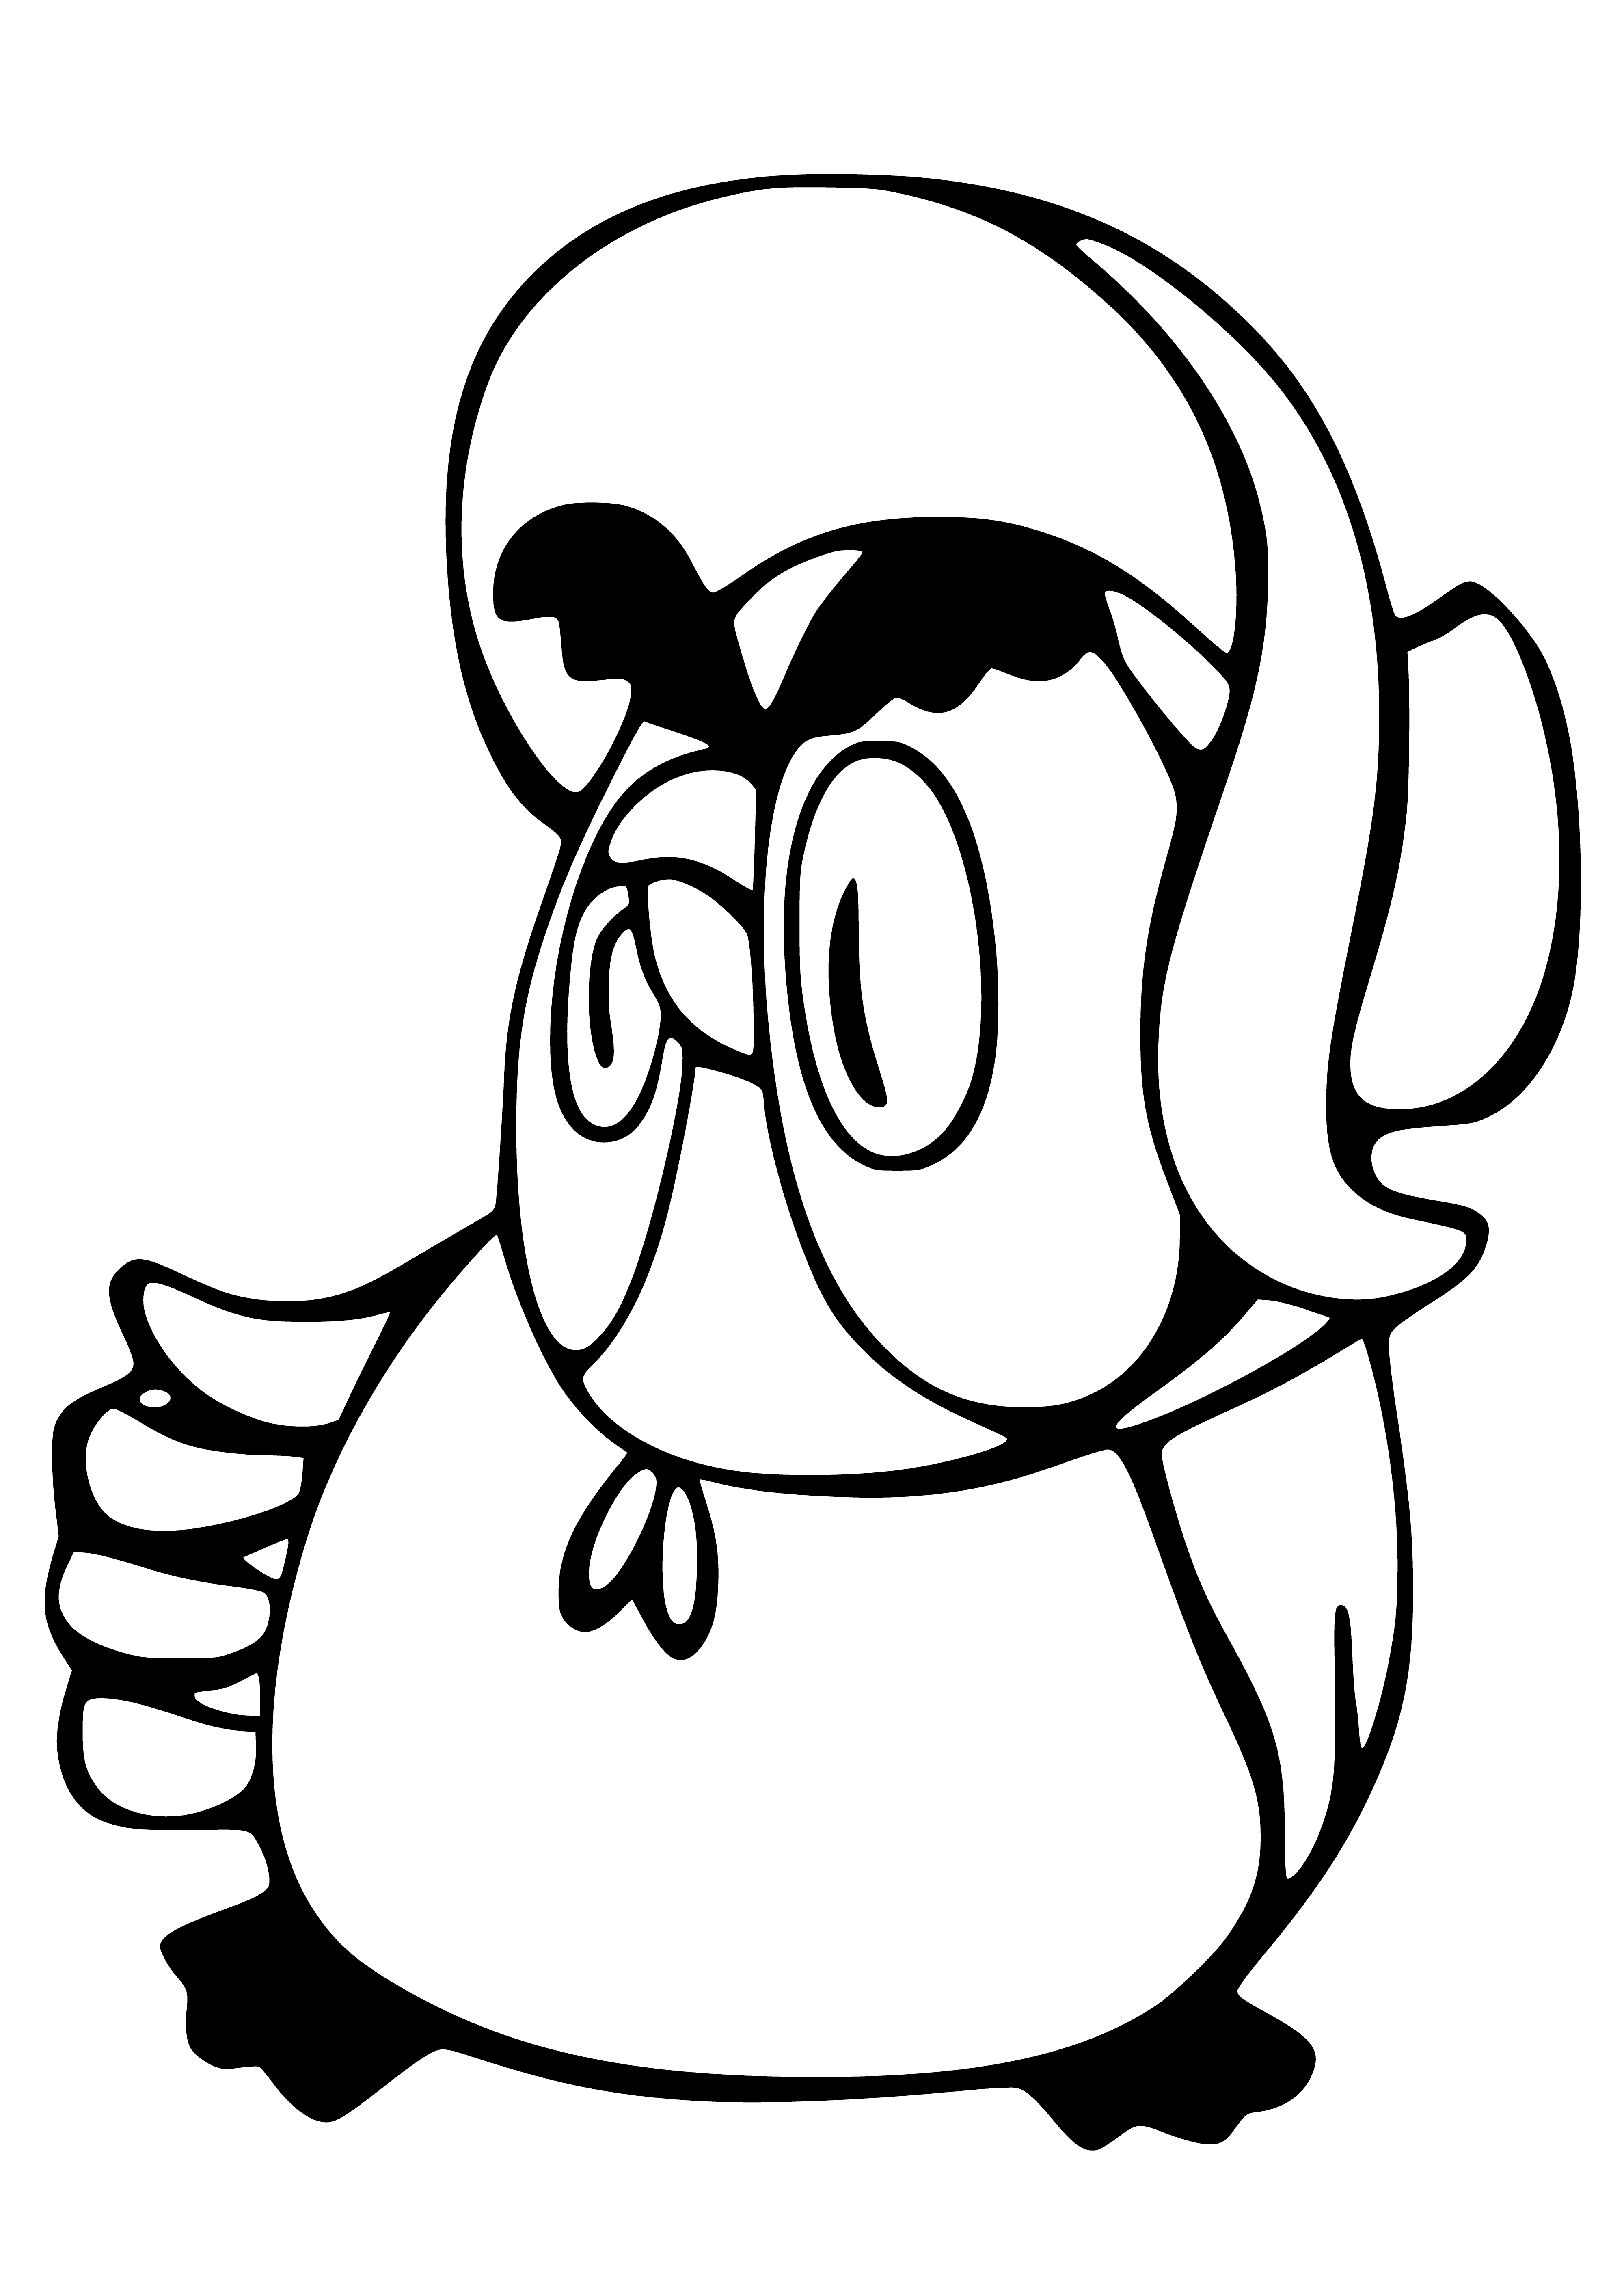 coloring page: Owl stands with arms crossed, wearing a bowtie, hat and big eyes.